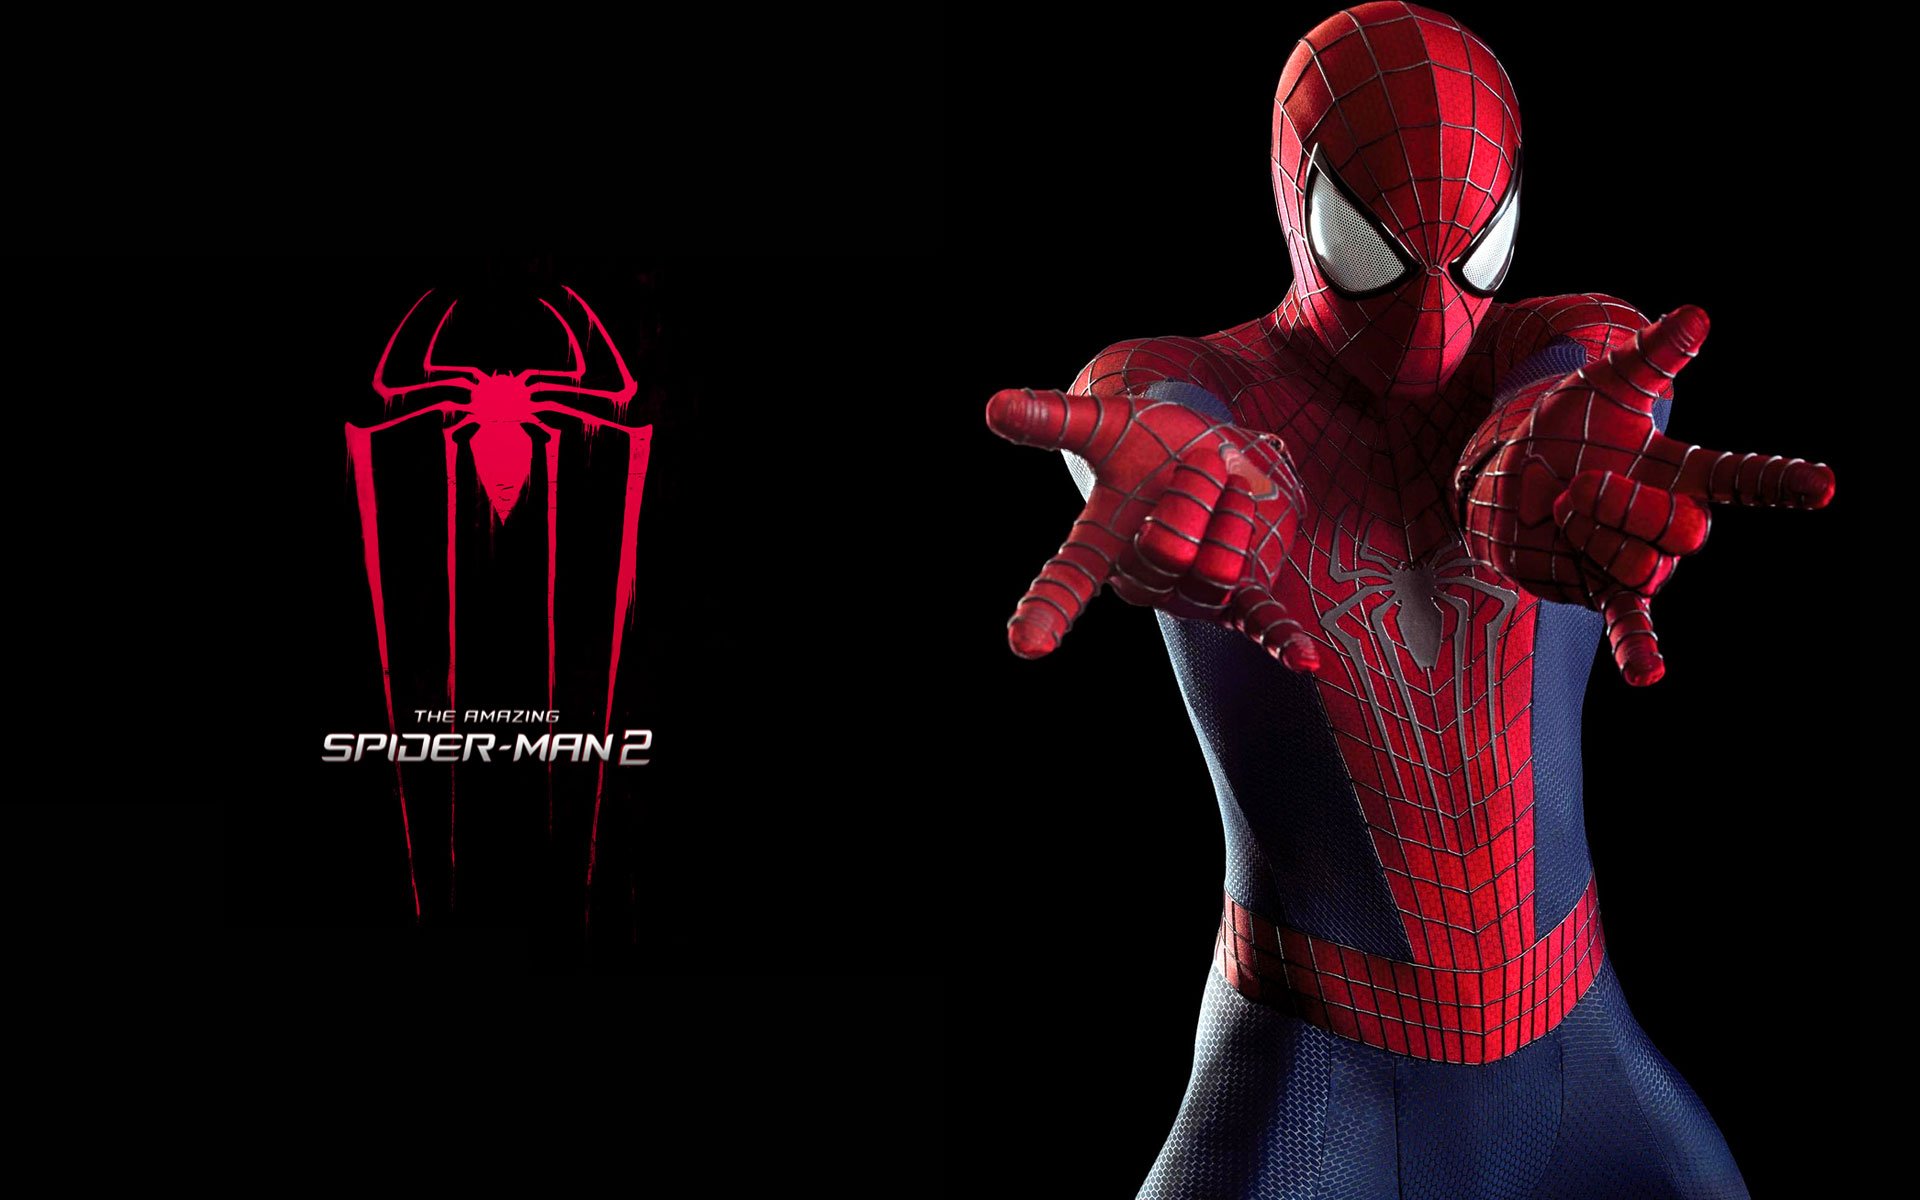 The Amazing Spider Man 2 Wallpapers Hd Facebook Cover HD Wallpapers Download Free Images Wallpaper [wallpaper981.blogspot.com]